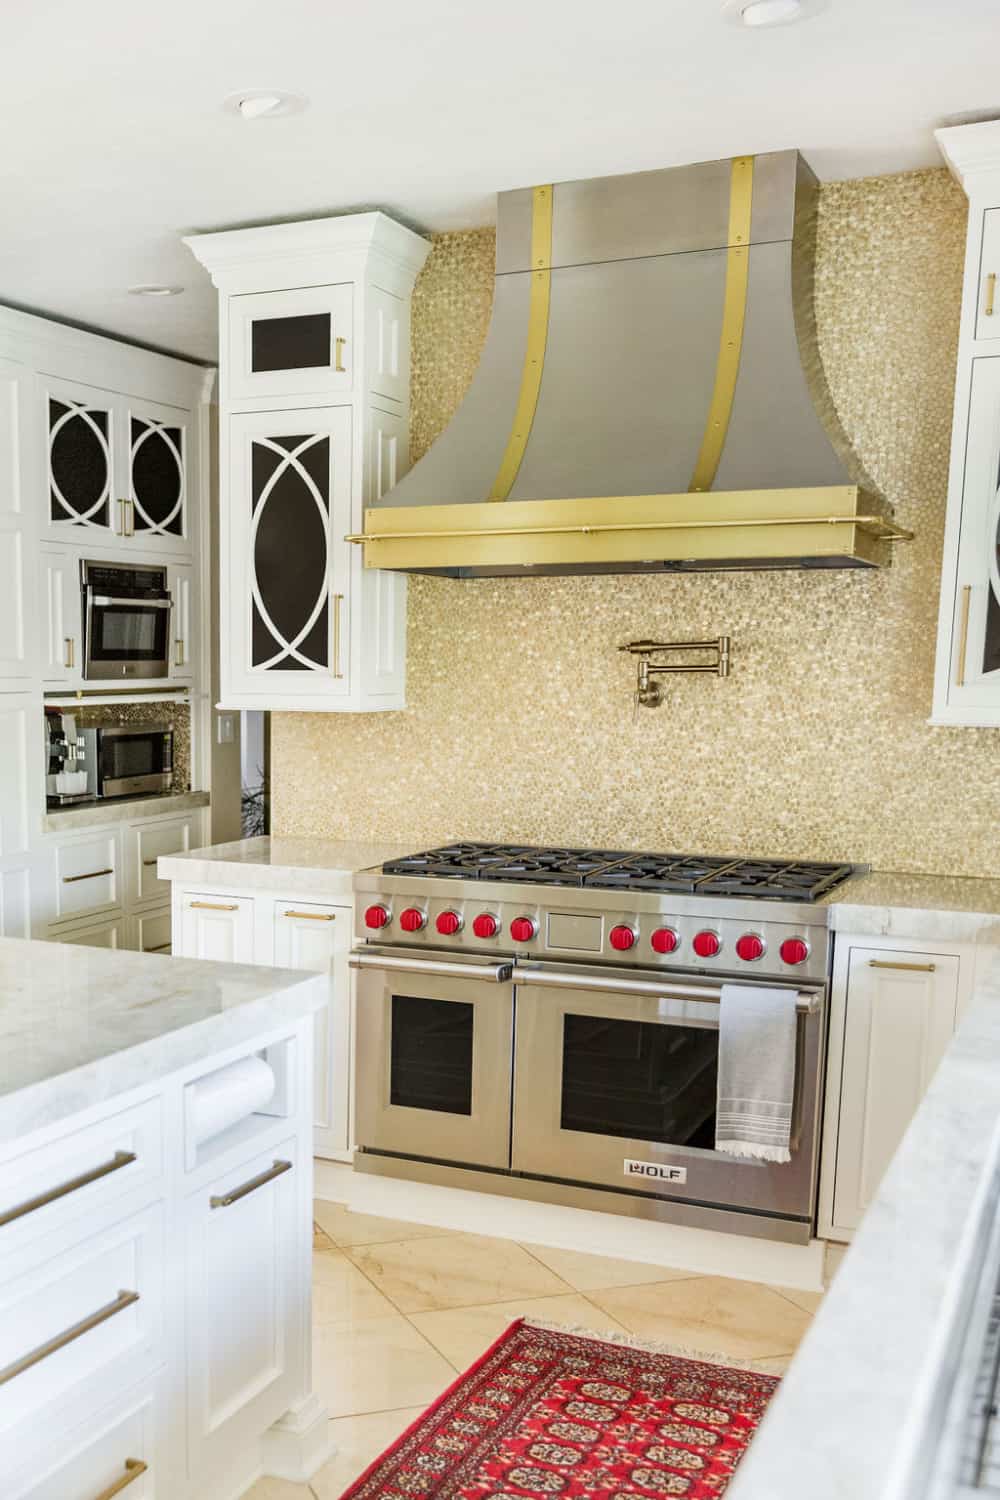 Nicholas Design Build | Remodeling a white kitchen with a stunning gold hood.